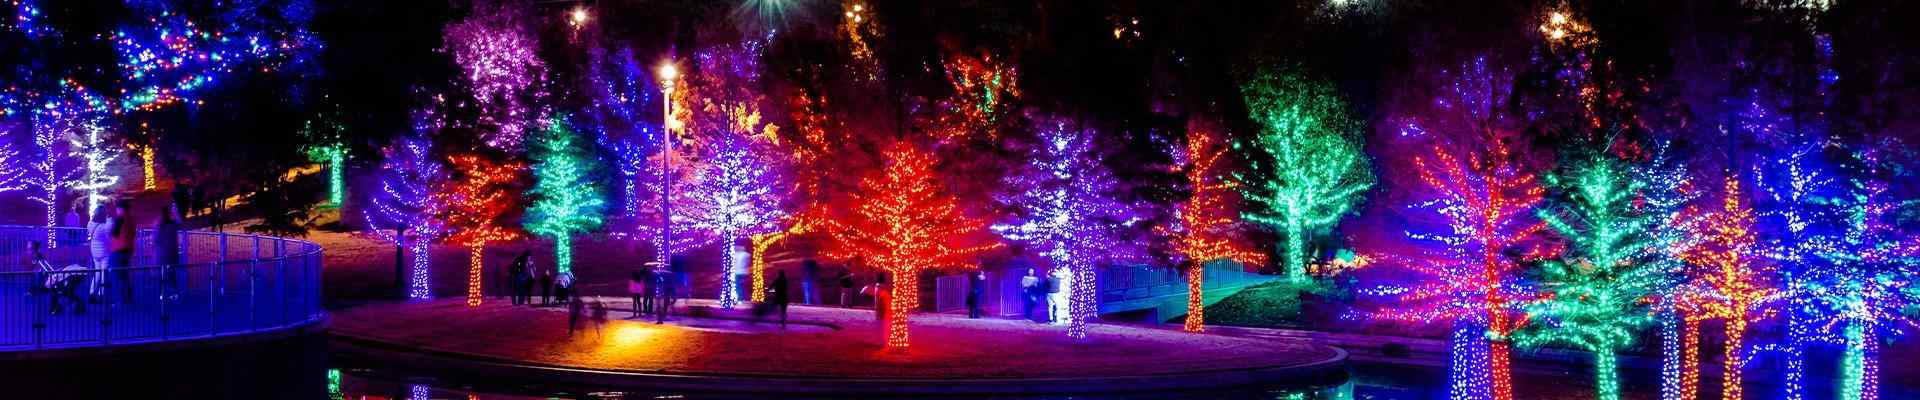 a row of trees in a park lit for the holidays in addison texas